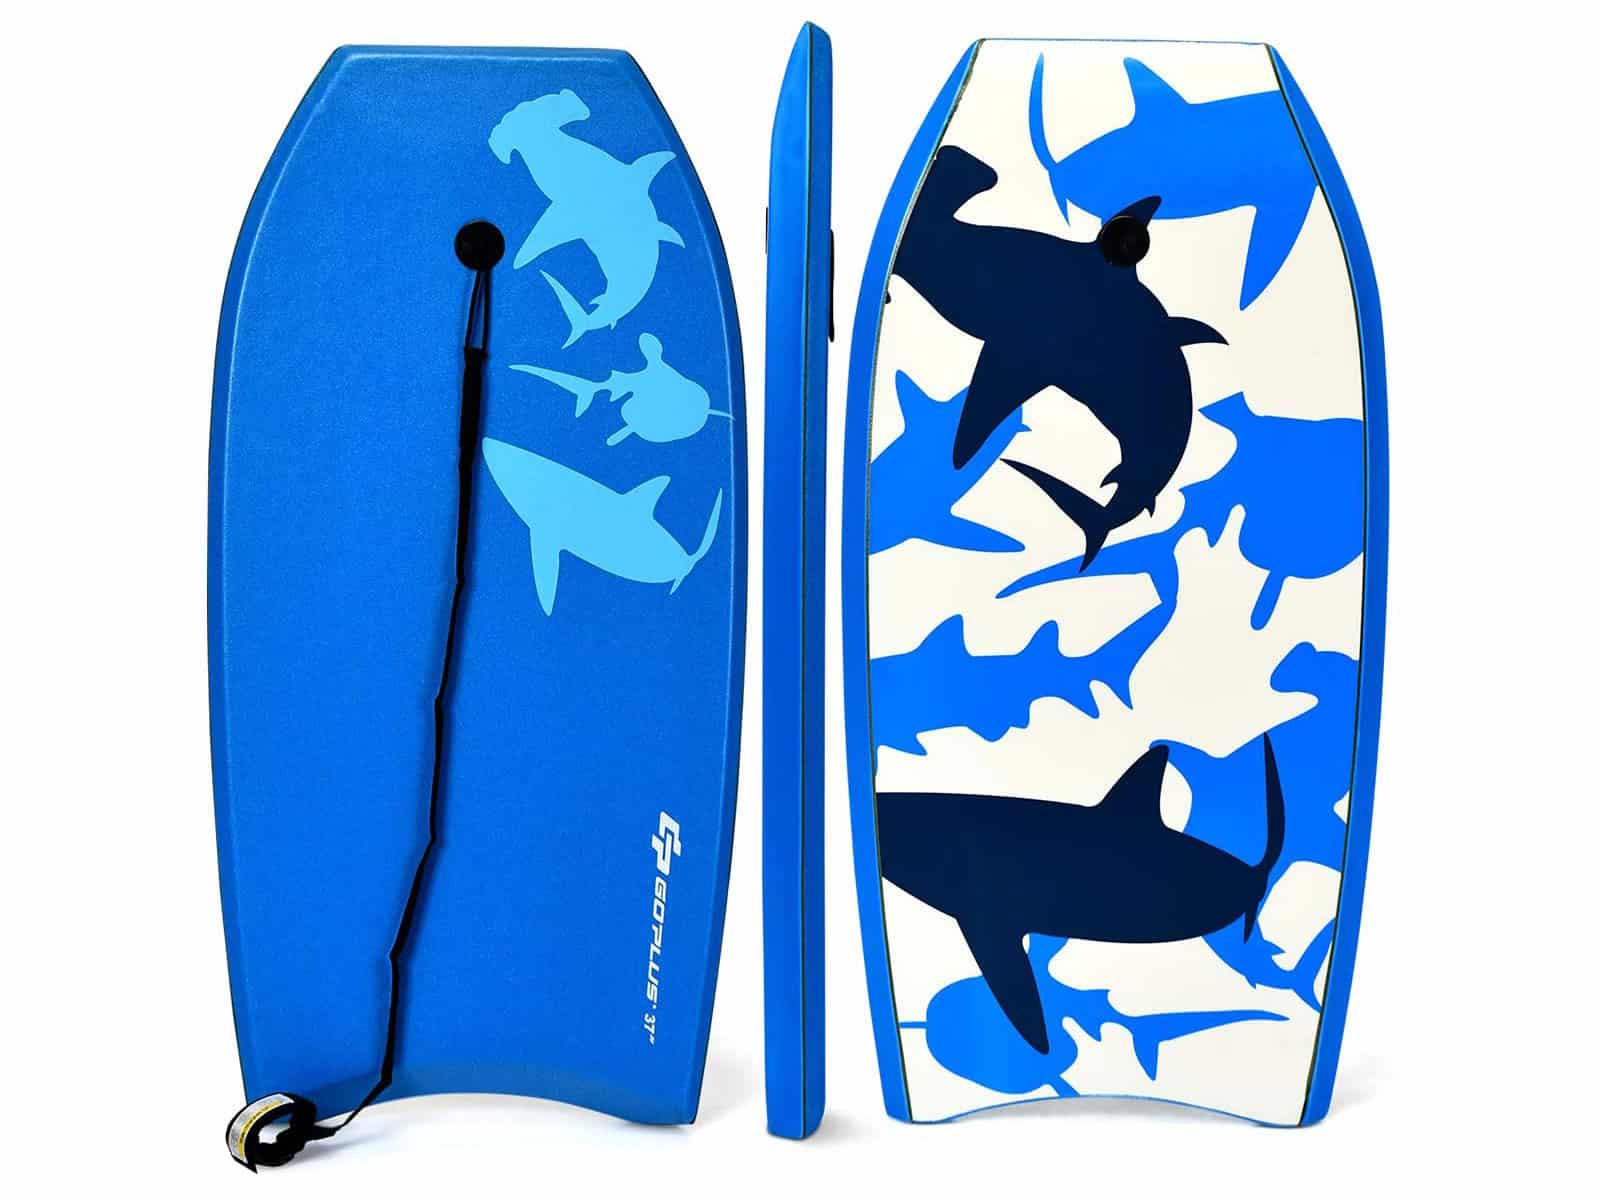 Goplus Body Board, Lightweight Bodyboard with EPS Core, XPE Deck, HDPE Slick Bottom, Premium Leash & Adjustable Wrist Rope, Perfect Surfing for Kids and Adults